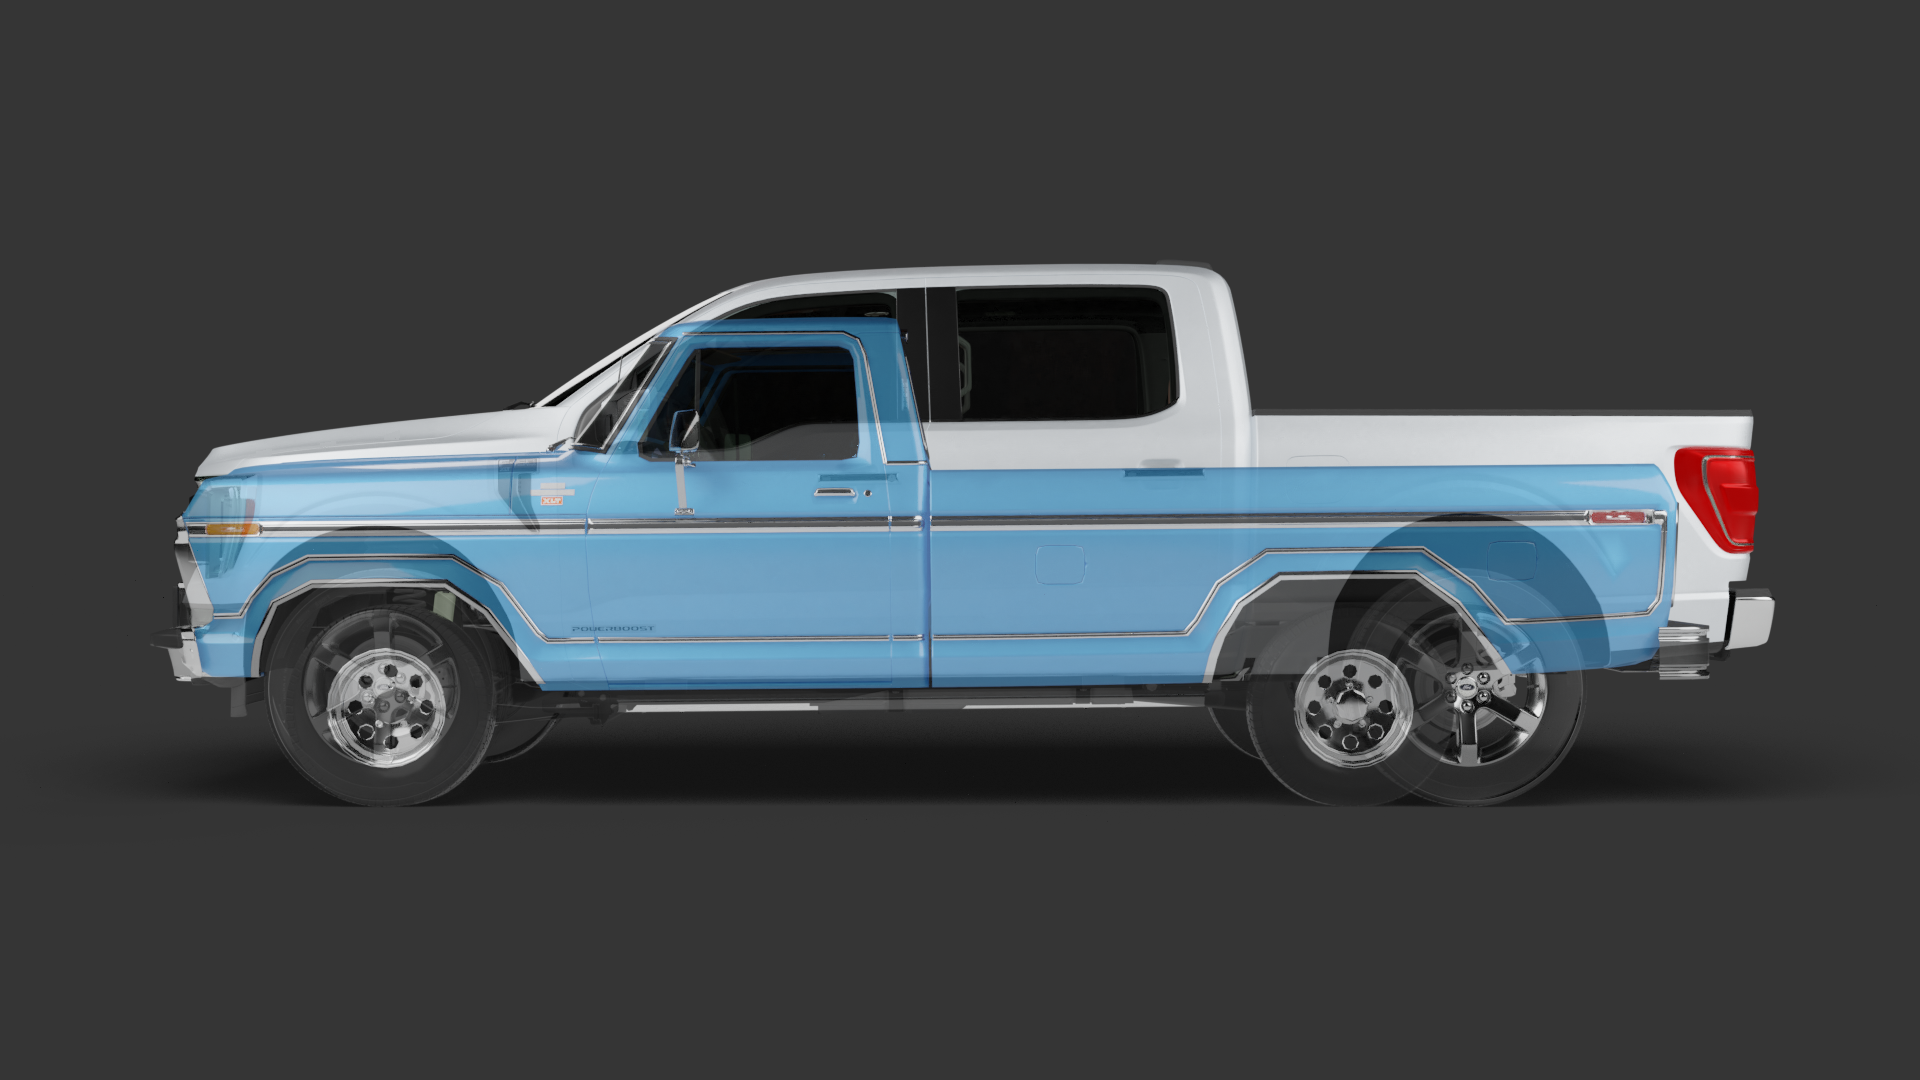 How pickup trucks got weight safety Size, so big: and